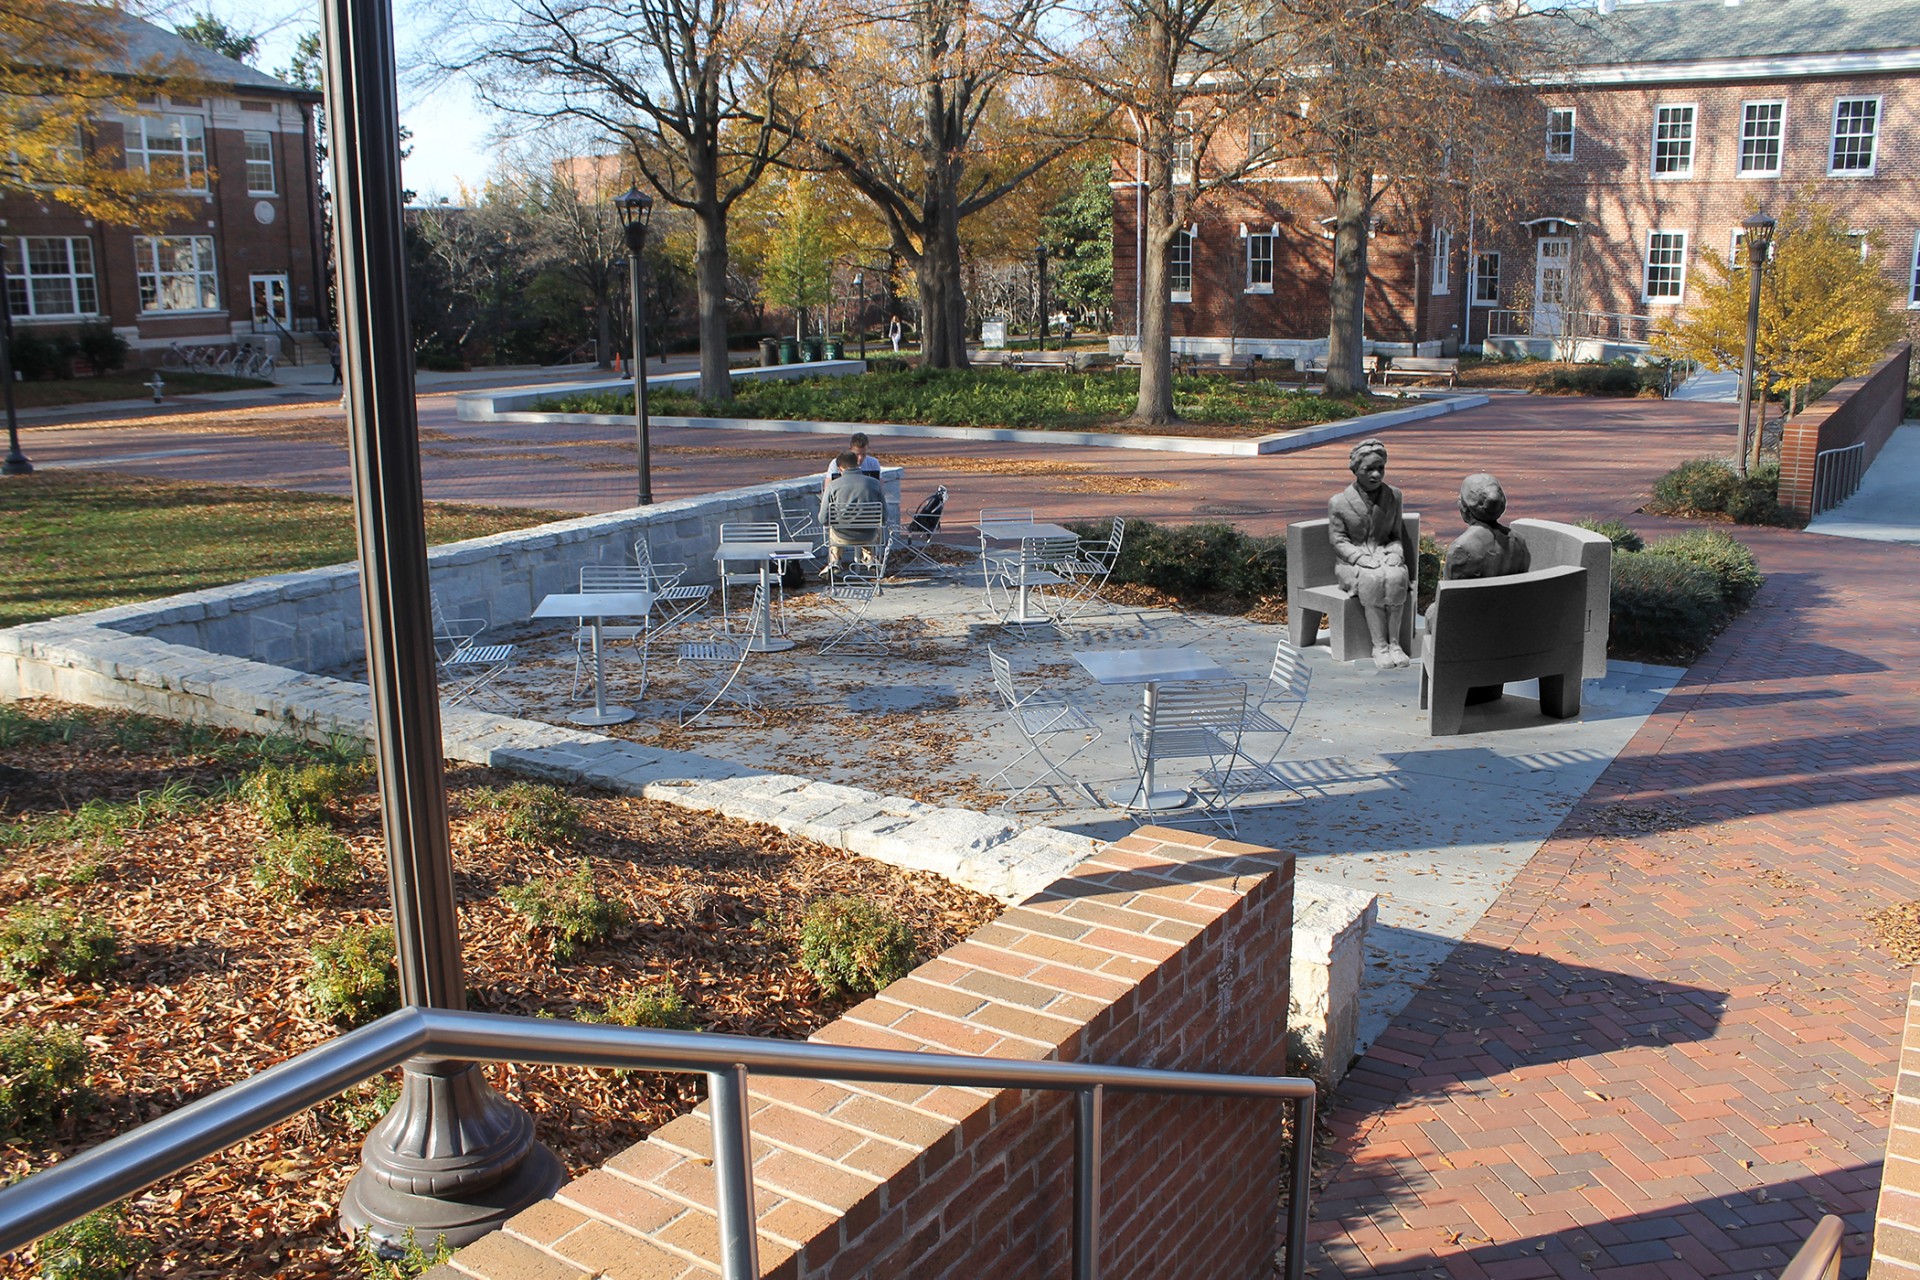 Mockup of sculpture with two Rosa Parks sitting with a bench between them in Harrison Square